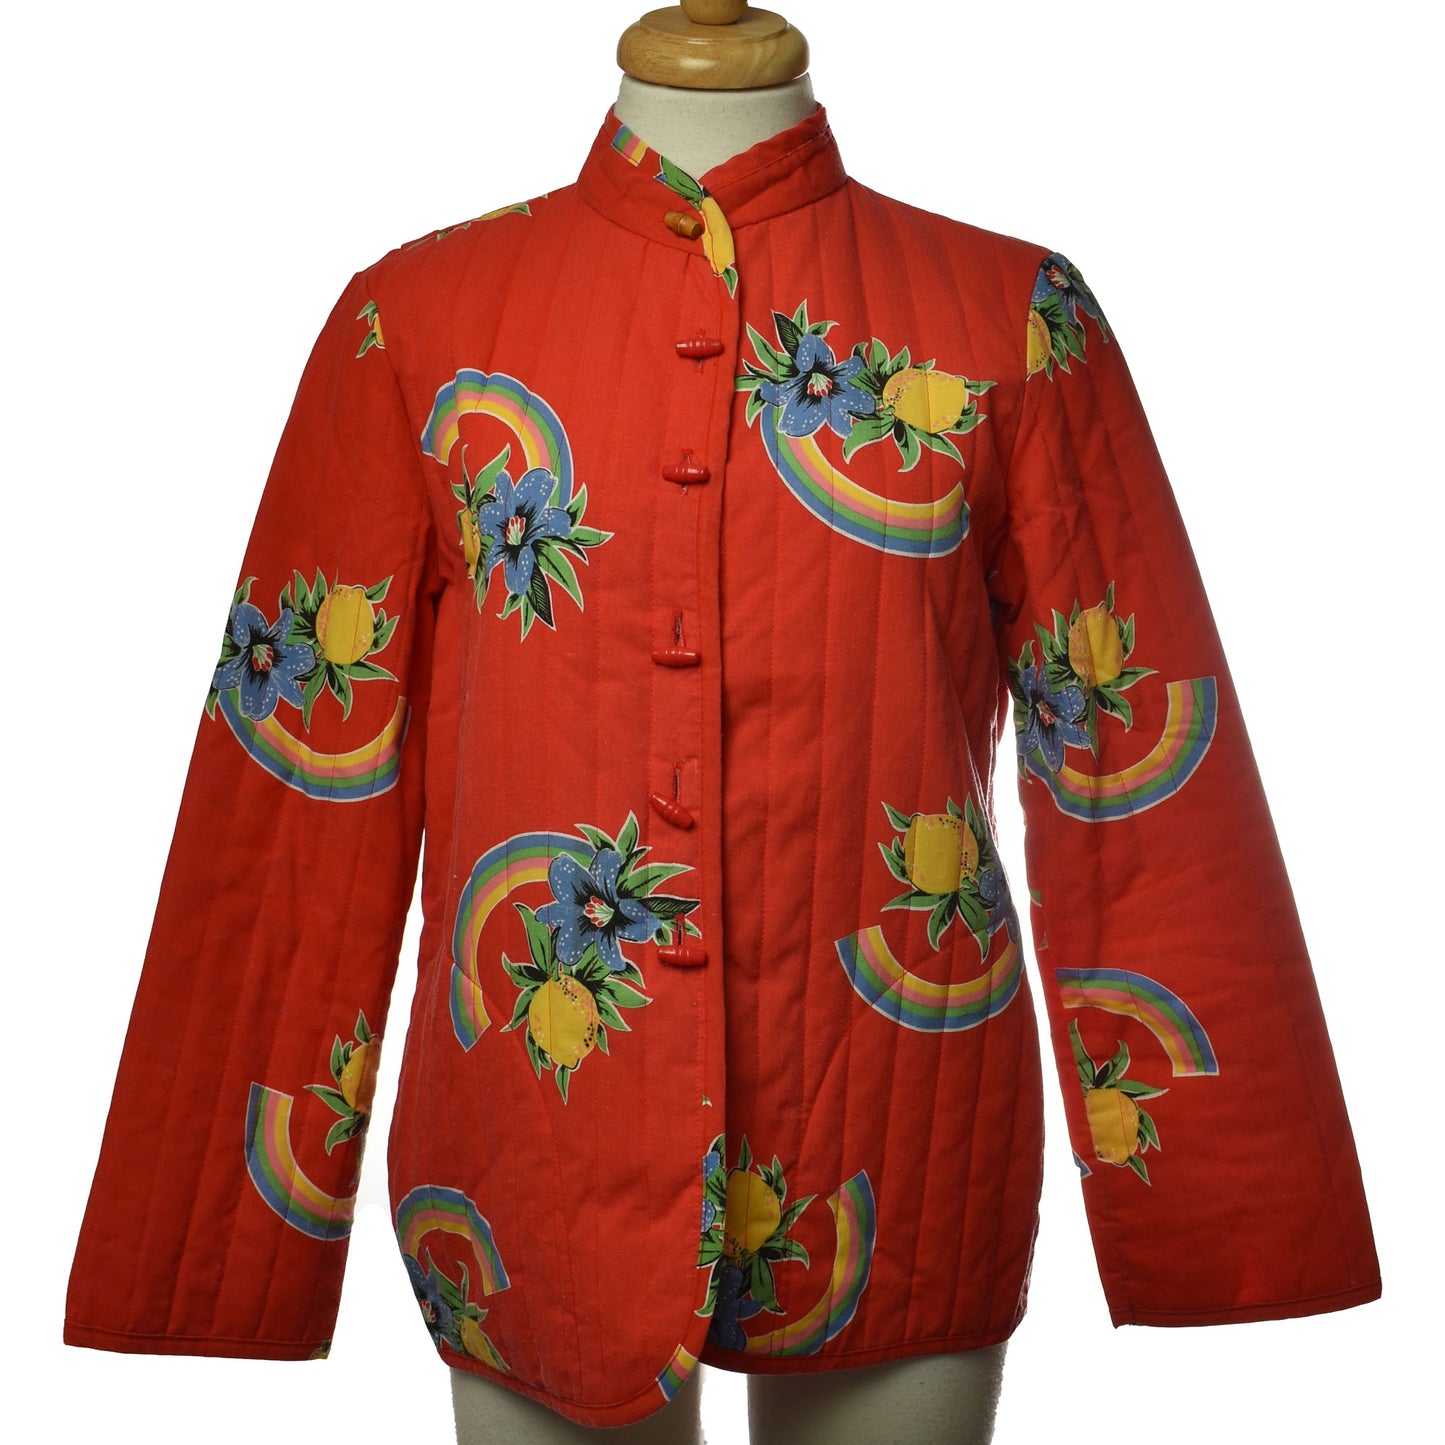 Vintage 70s Katch Red Quilted Jacket With Rainbows and Flowers